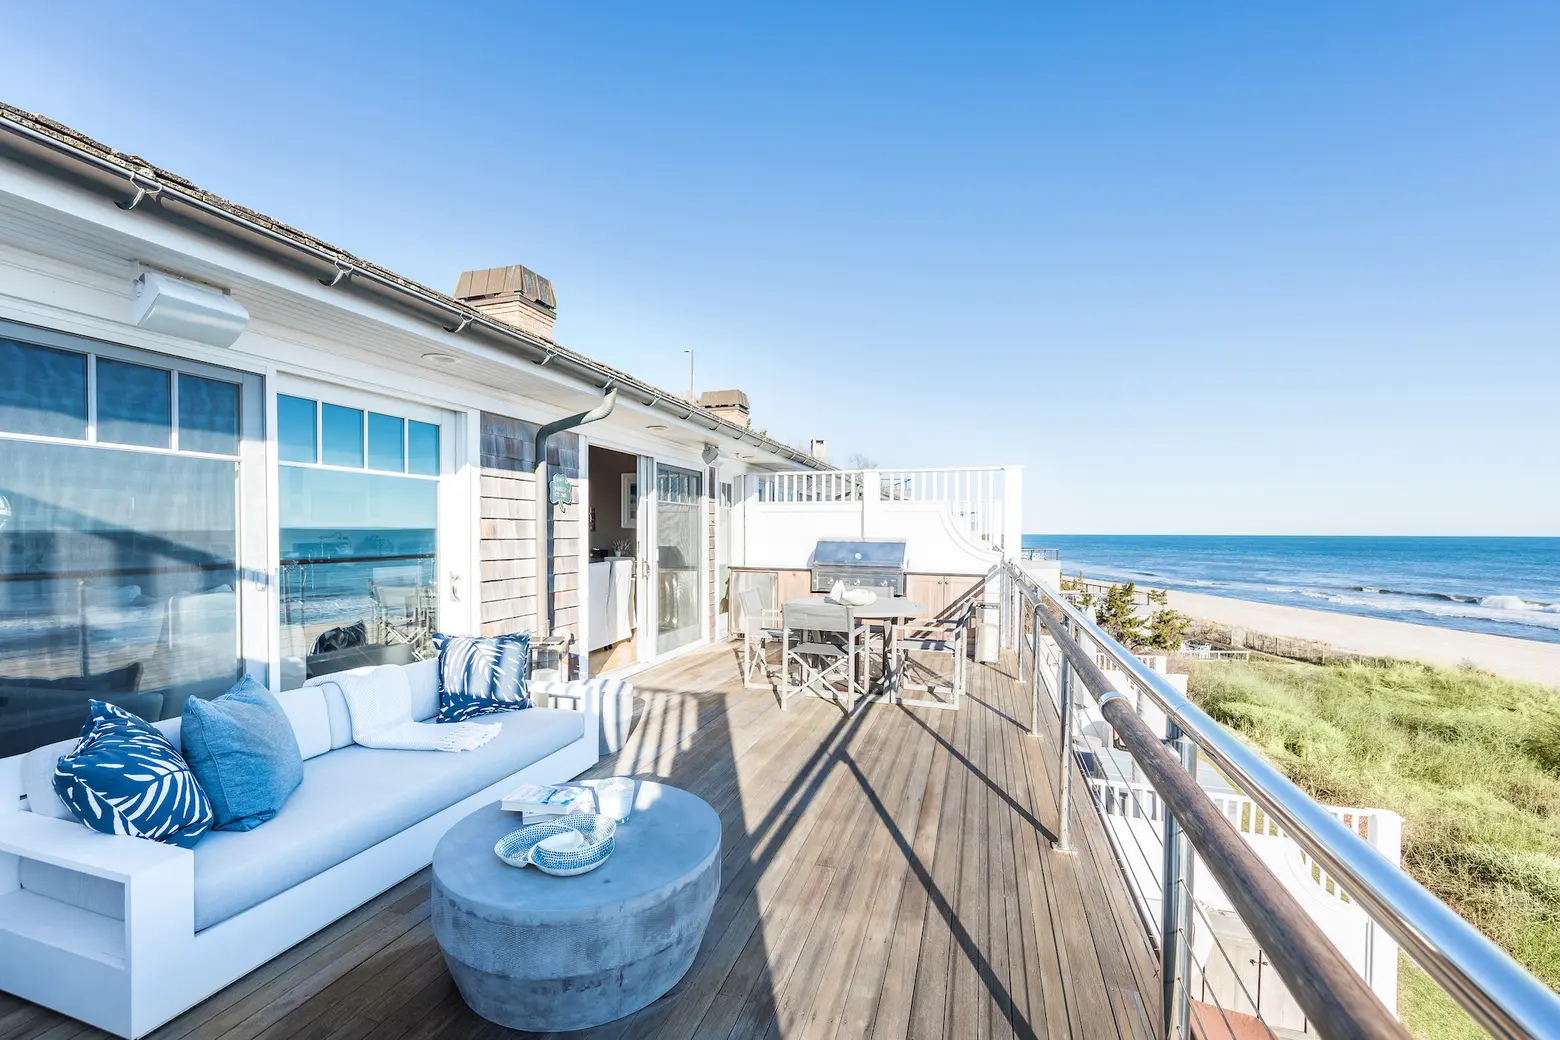 $5.35M Montauk home comes with a private beach cabana and access to Gurney’s Resort